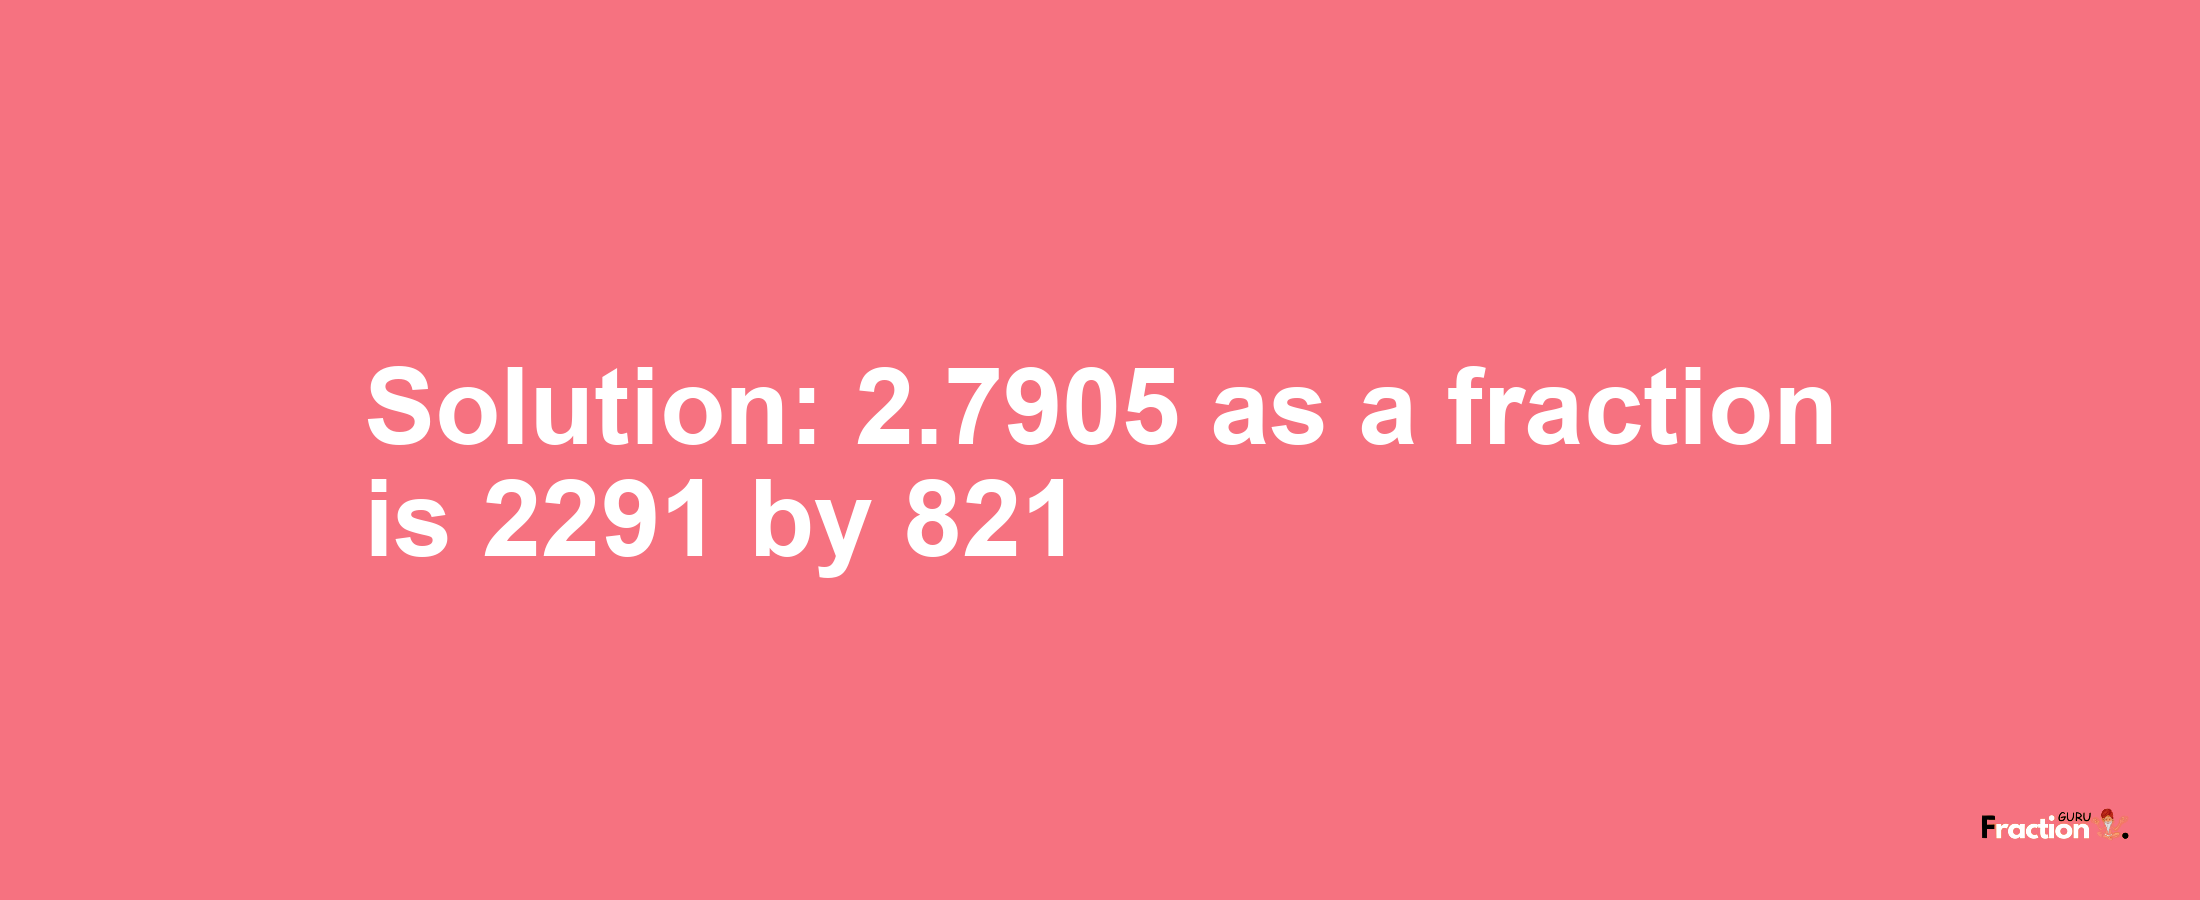 Solution:2.7905 as a fraction is 2291/821